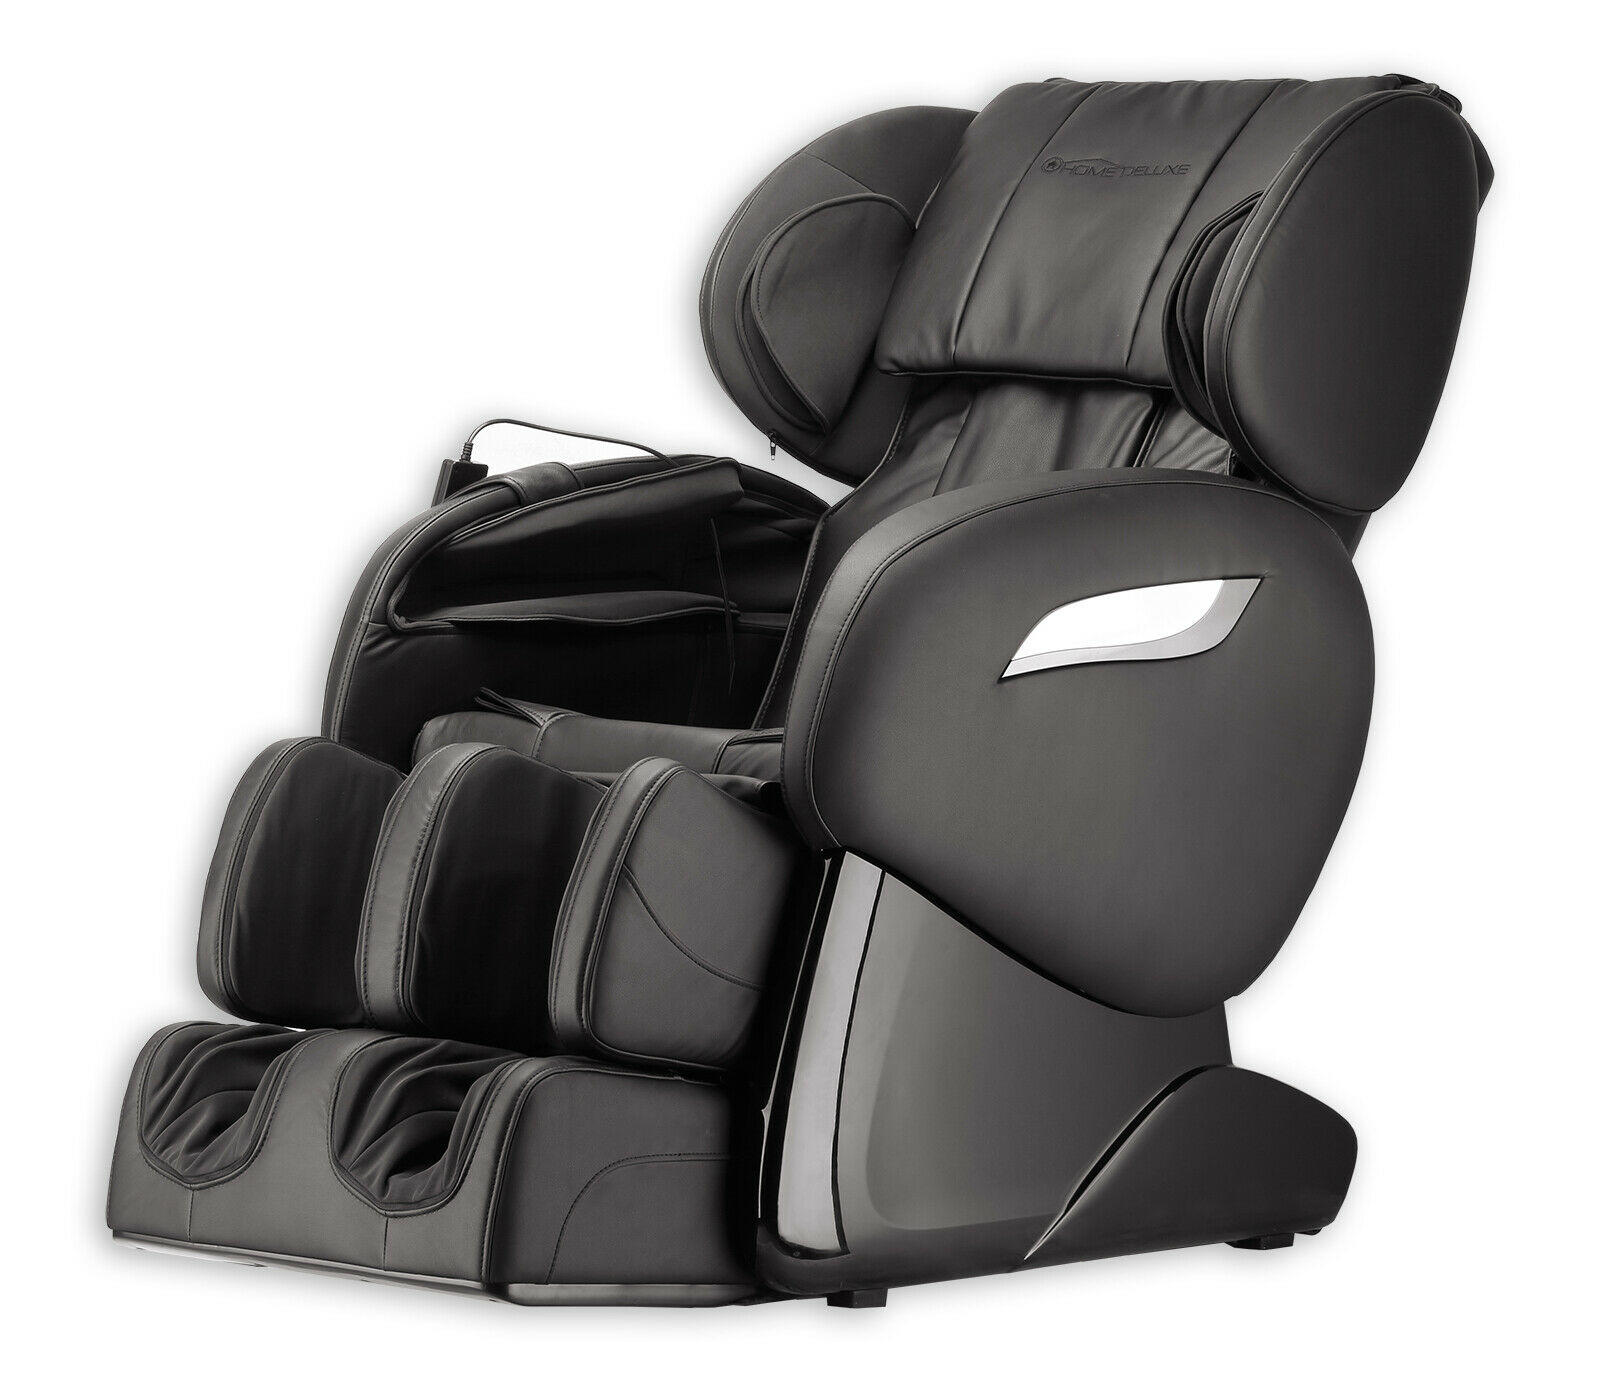 Read more about the article Home Deluxe Massagesessel Sueno V2 Test, Angebot und Kaufen (ALDI)